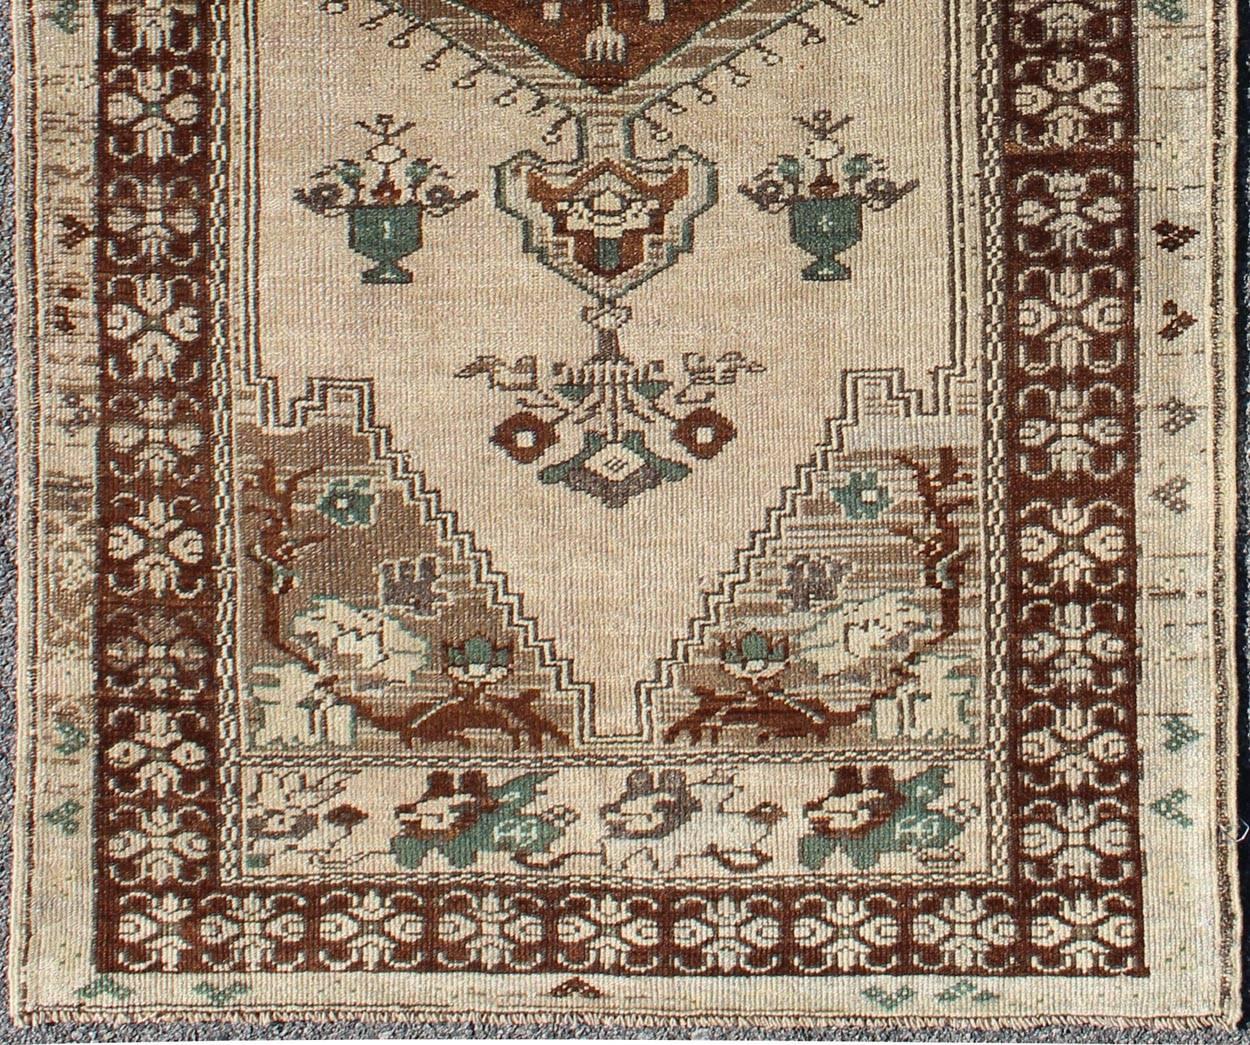 This vintage Turkish Oushak carpet (circa mid-20th century) features a central medallion design, as well as patterns of smaller flowers and floral elements in the four cornices, and in the surrounding borders. The rug's qualities are enhanced by its